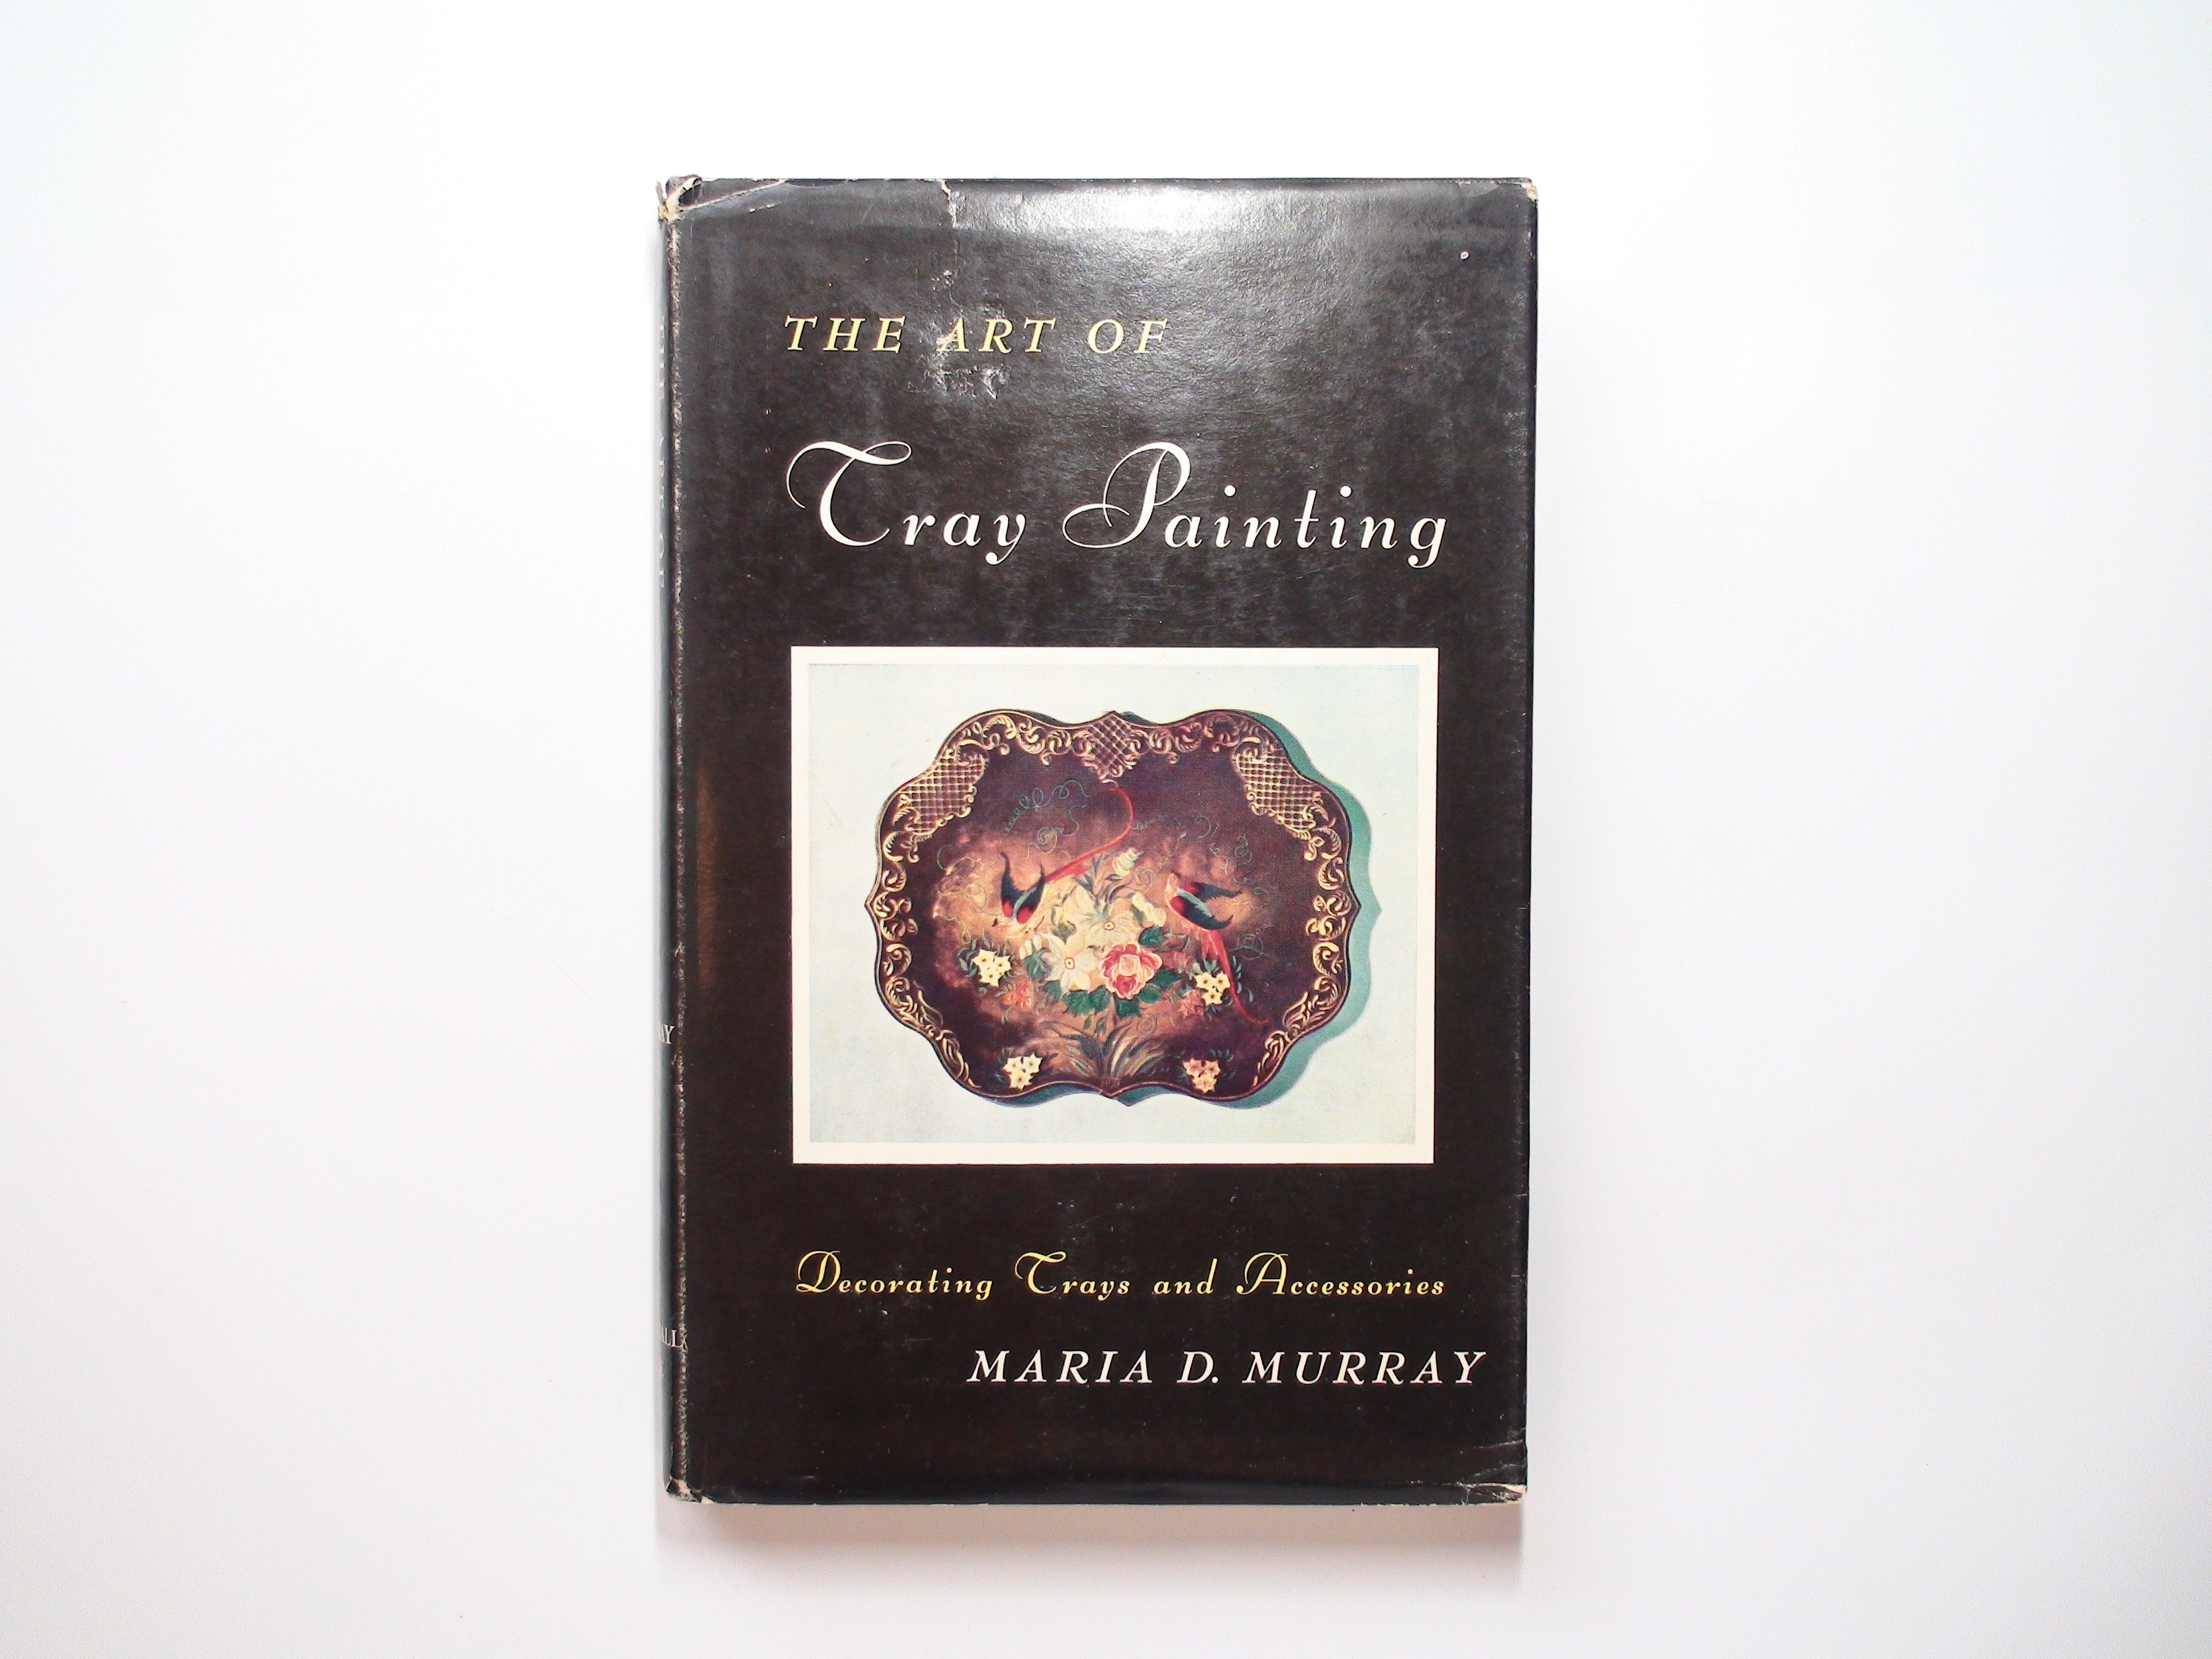 The Art of Tray Painting, Maria D. Murray, Illustrated, 1st Ed, 1954